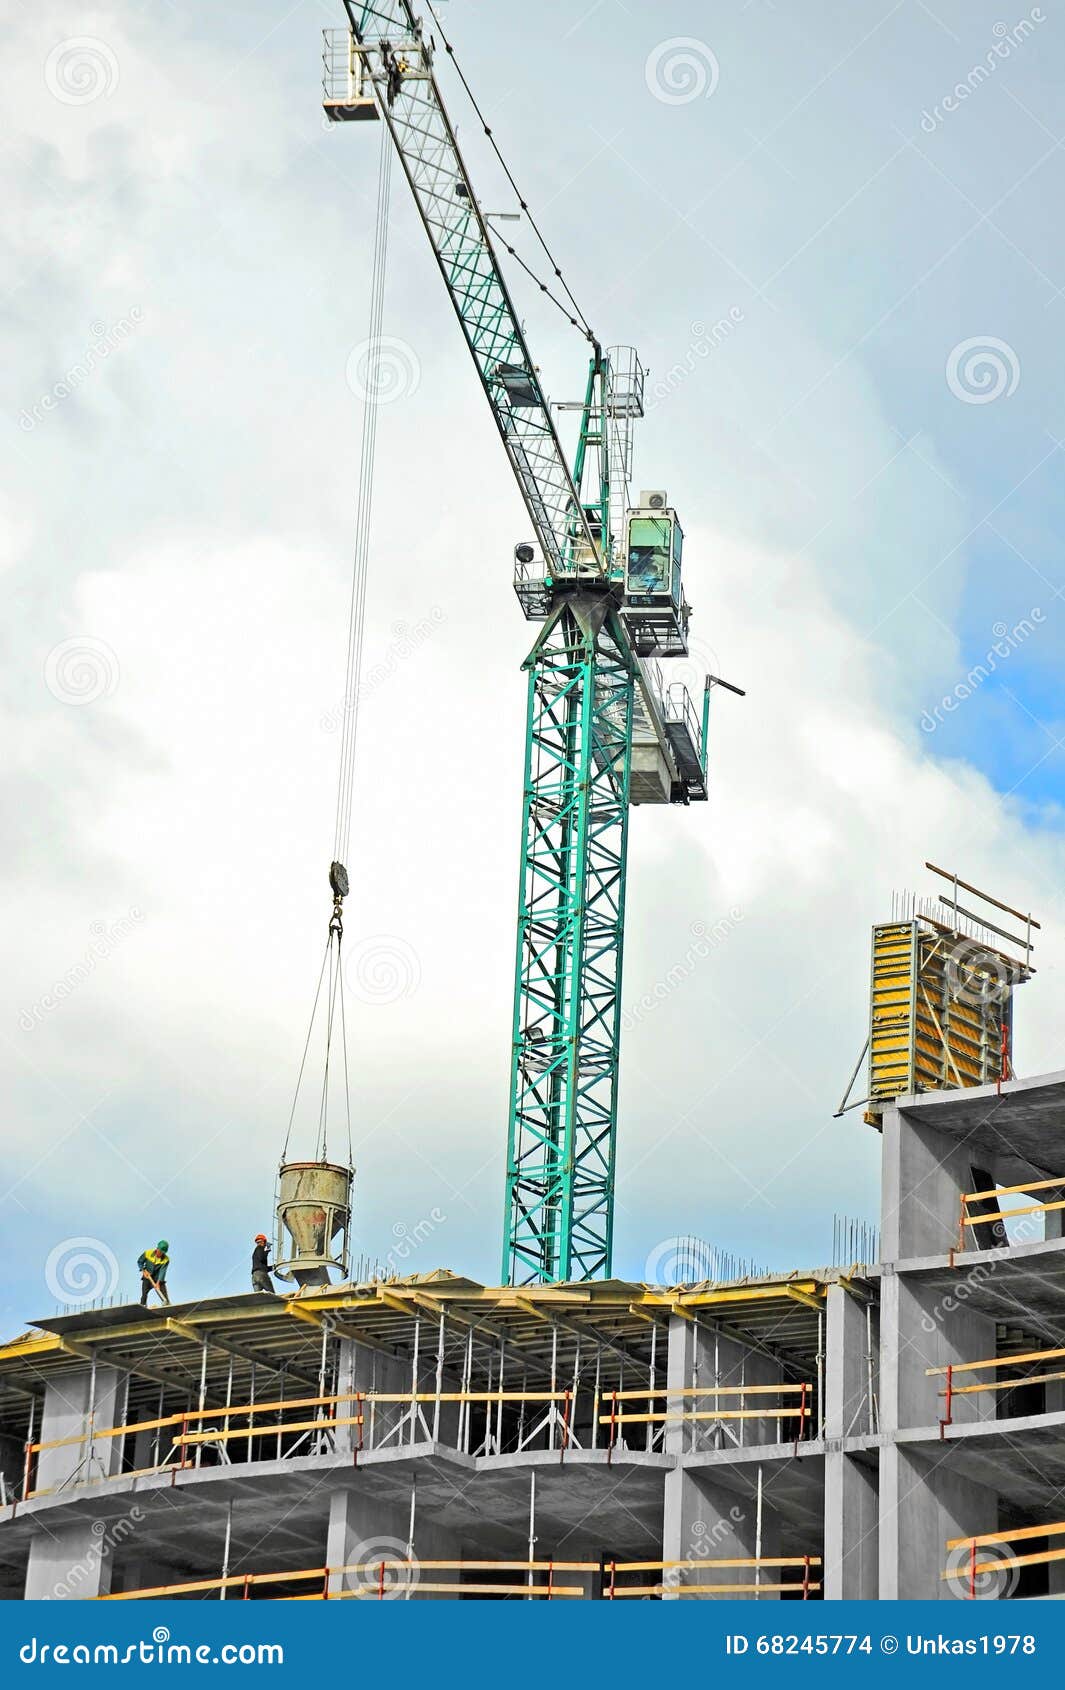 Crane Lifting Cement Mixing Container Stock Photo - Image of home, high